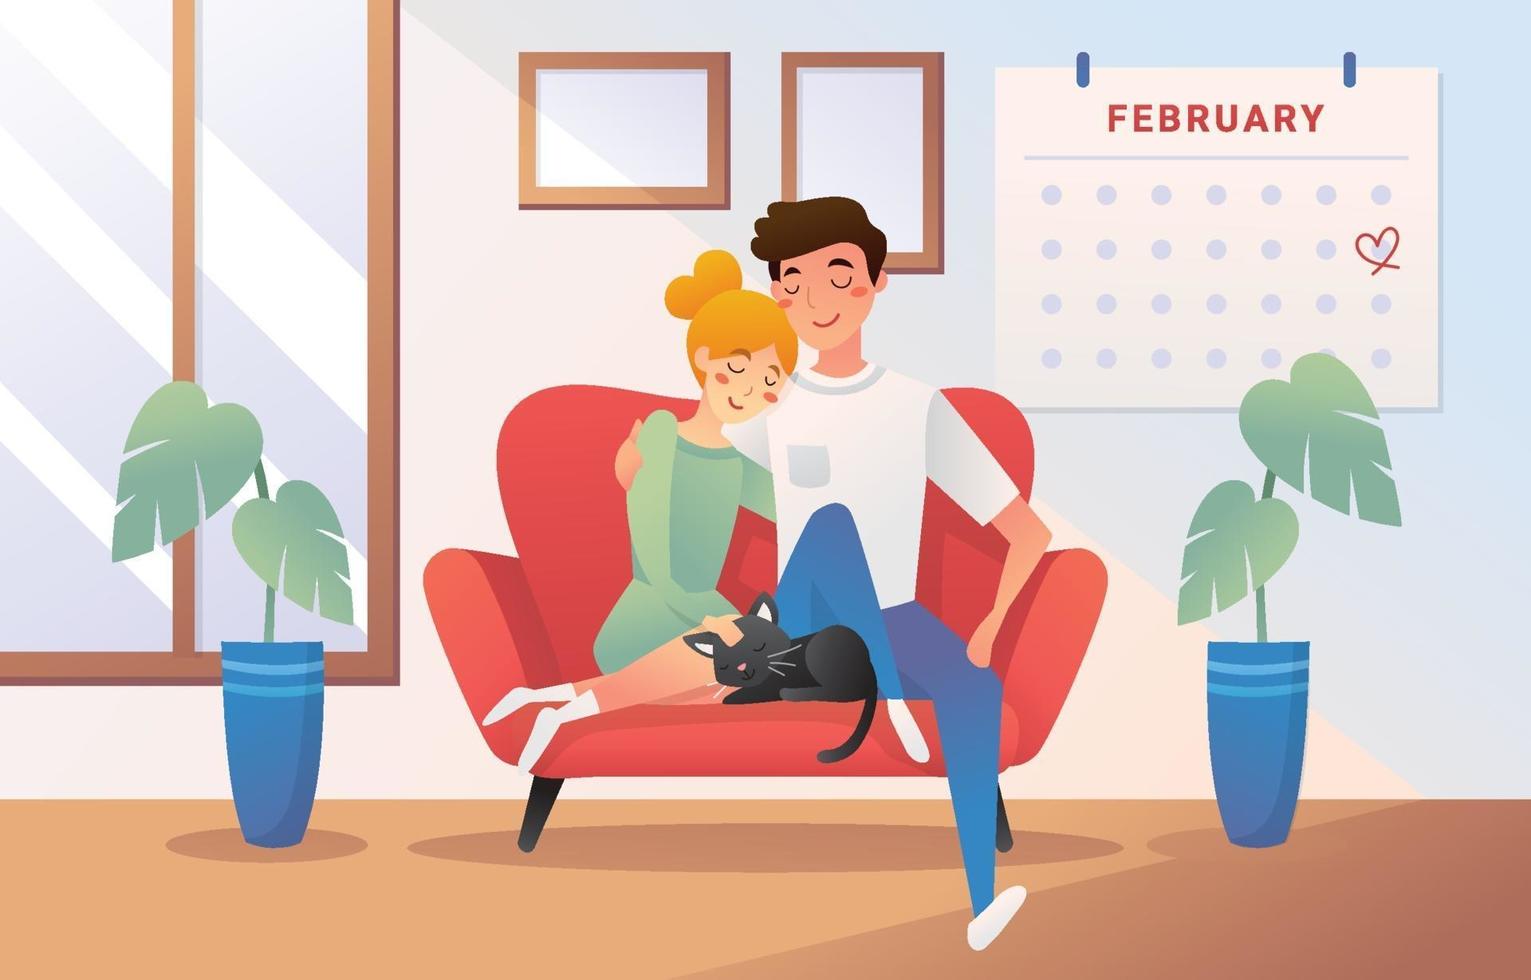 Stay at Home Valentines Date vector